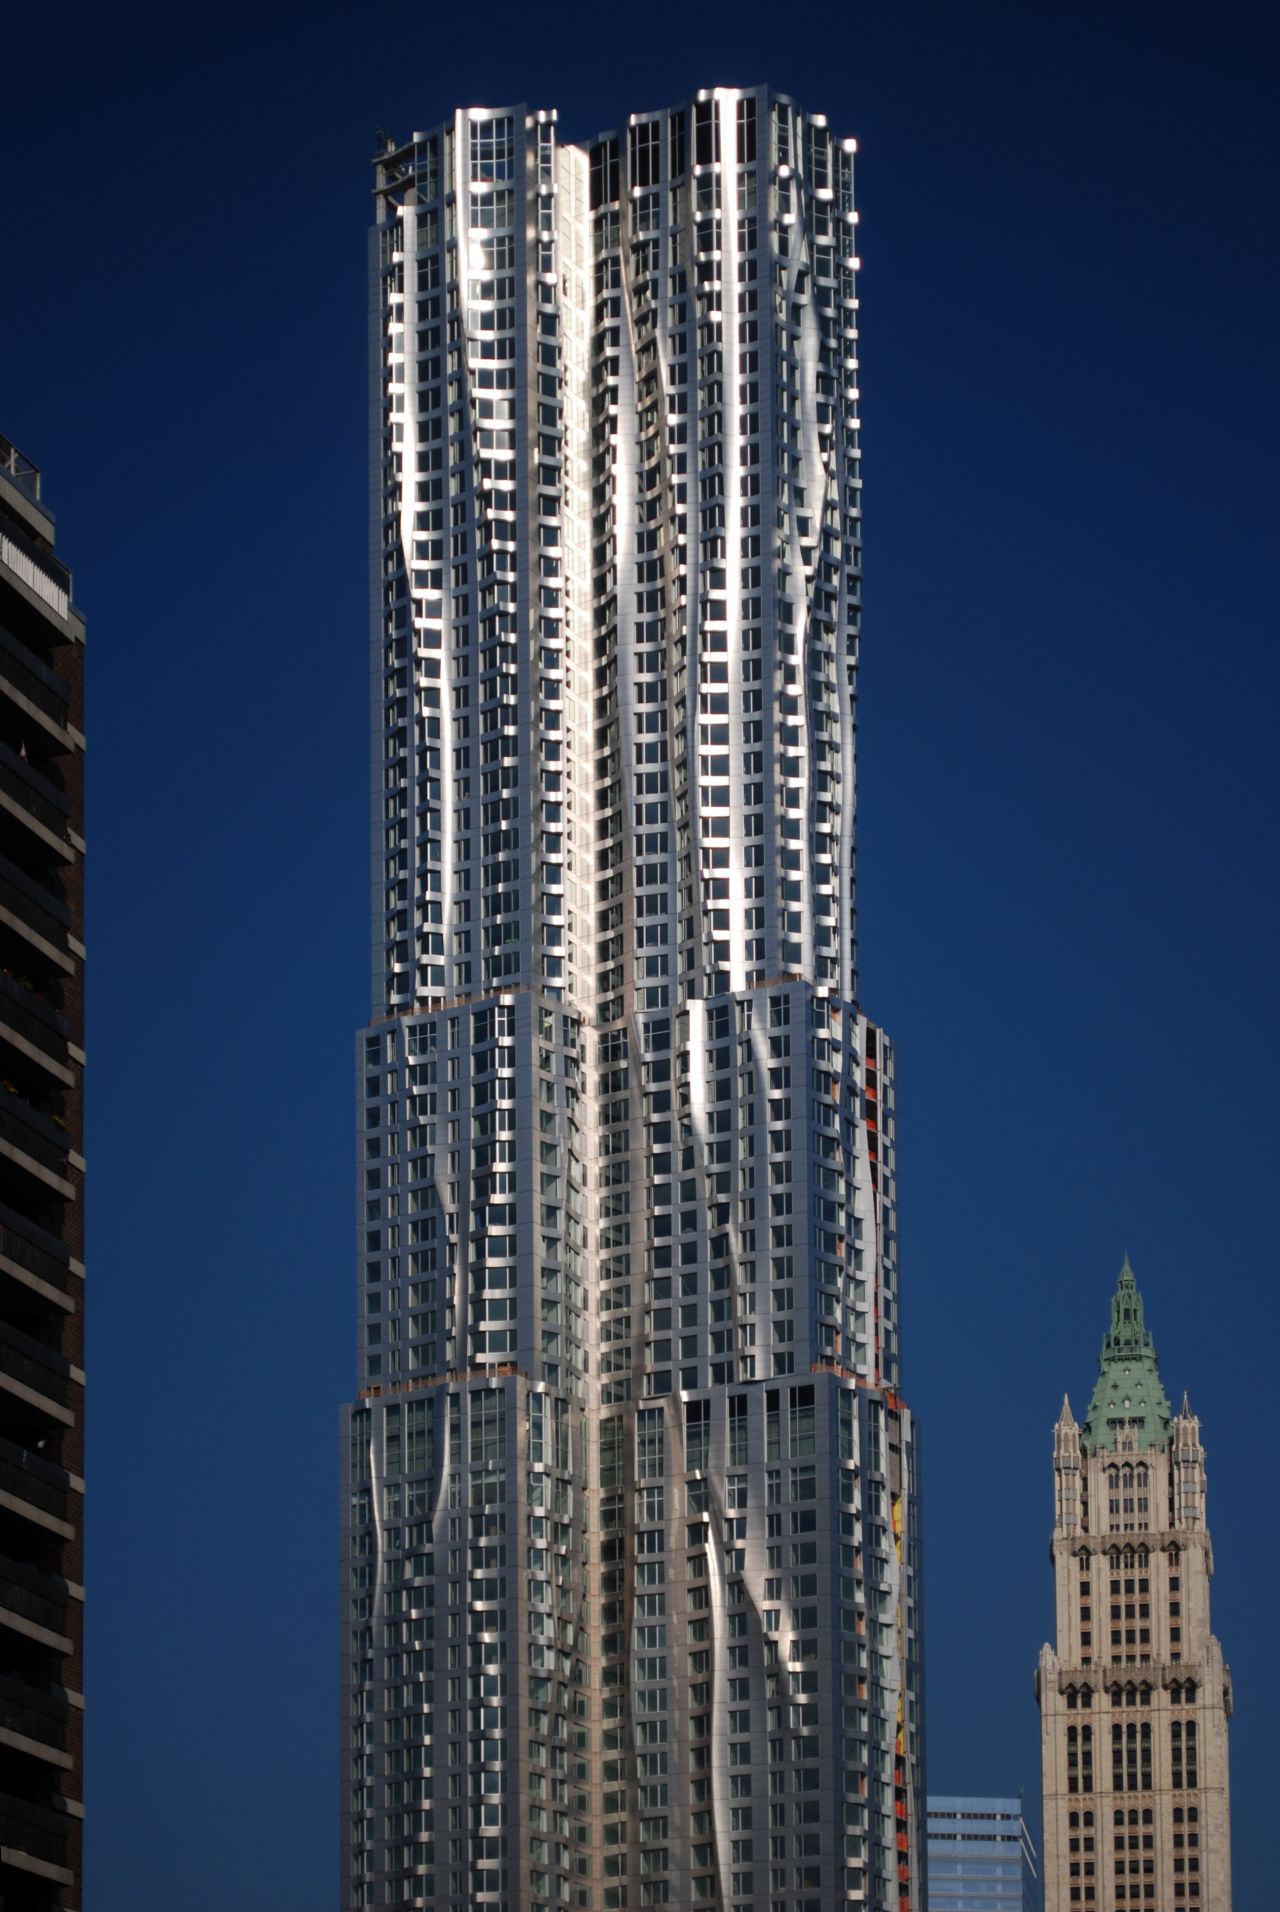 The facade of the skyscraper is composed of 10,500 stainless steel panels, some flat, some undulating.In order to better integrate the eye-catching building into its urban context, the bottom five stories of the tower are clad in brick.<strong>Architect</strong>: Frank O. Gehry